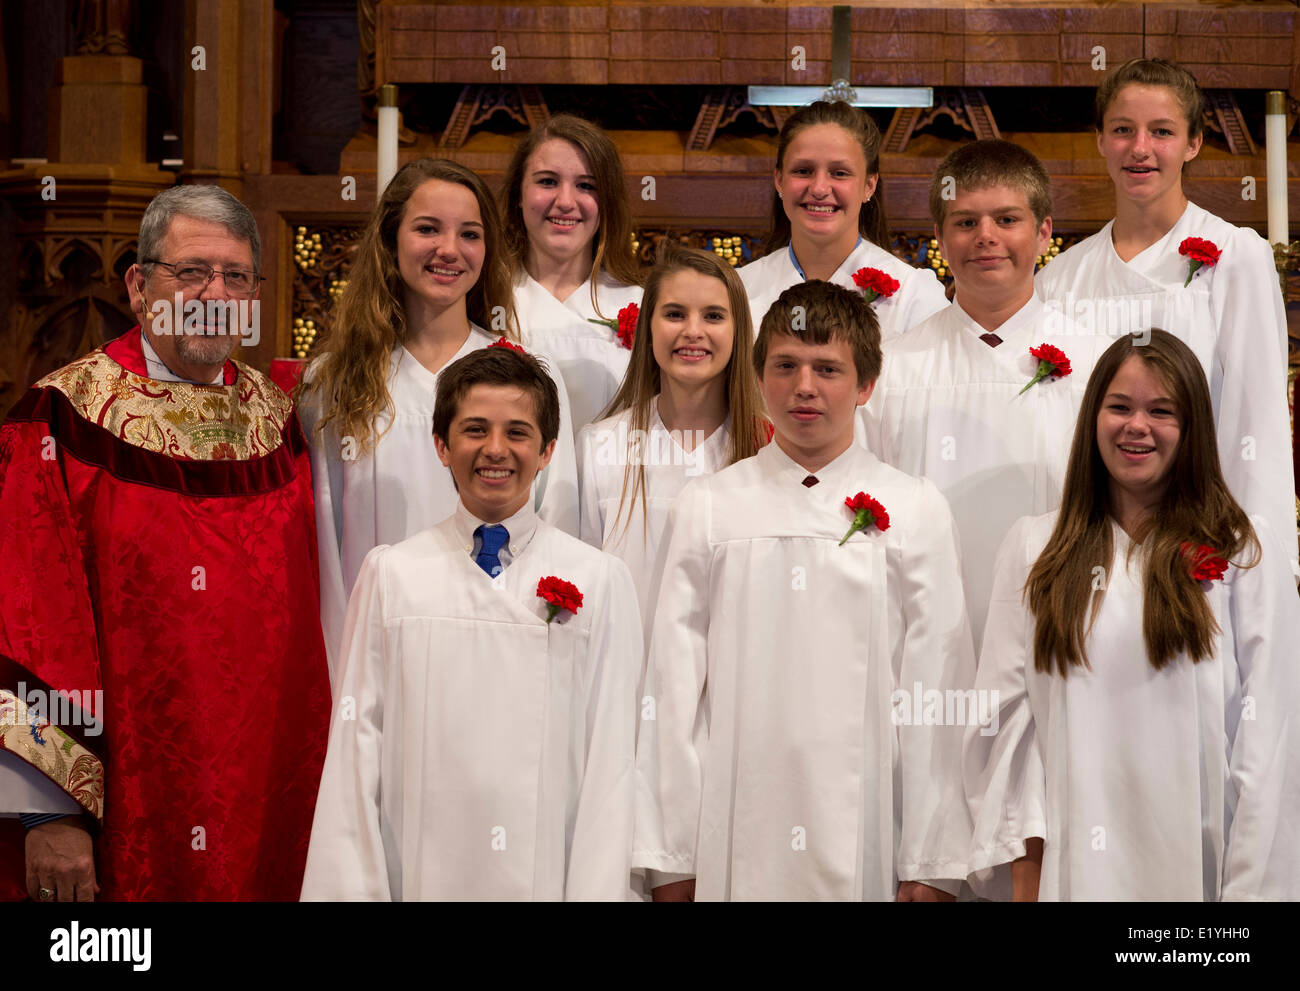 Lutheran teenagers participating in the Rite of Confirmation pose with their pastor at the completion of the service. Stock Photo